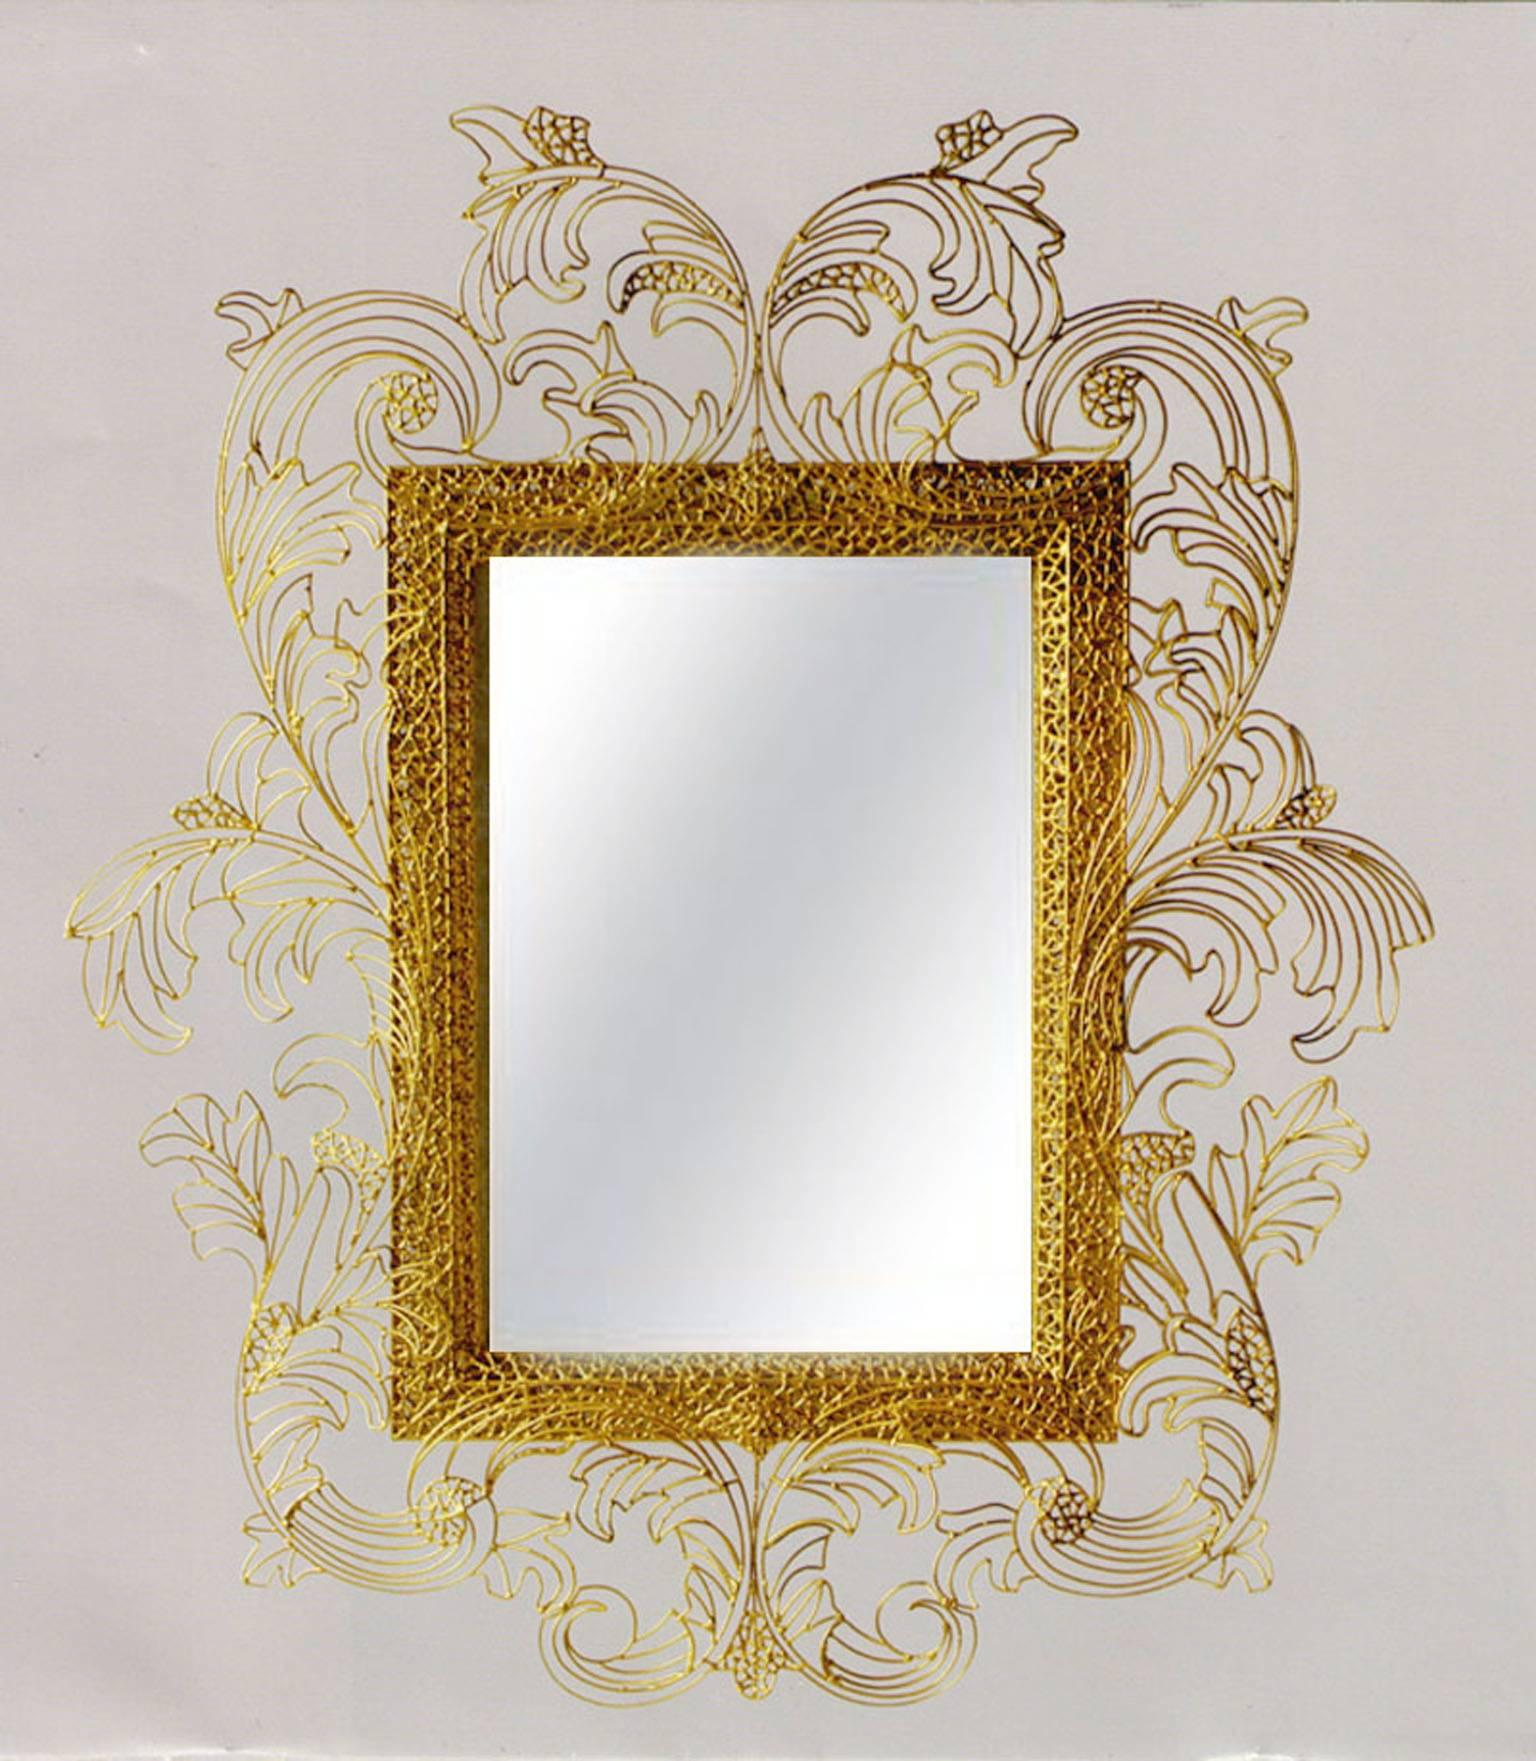 Metal Handmade Console with Mirror in Baroque Style Unique Piece by A Spazzapan, 2010 For Sale